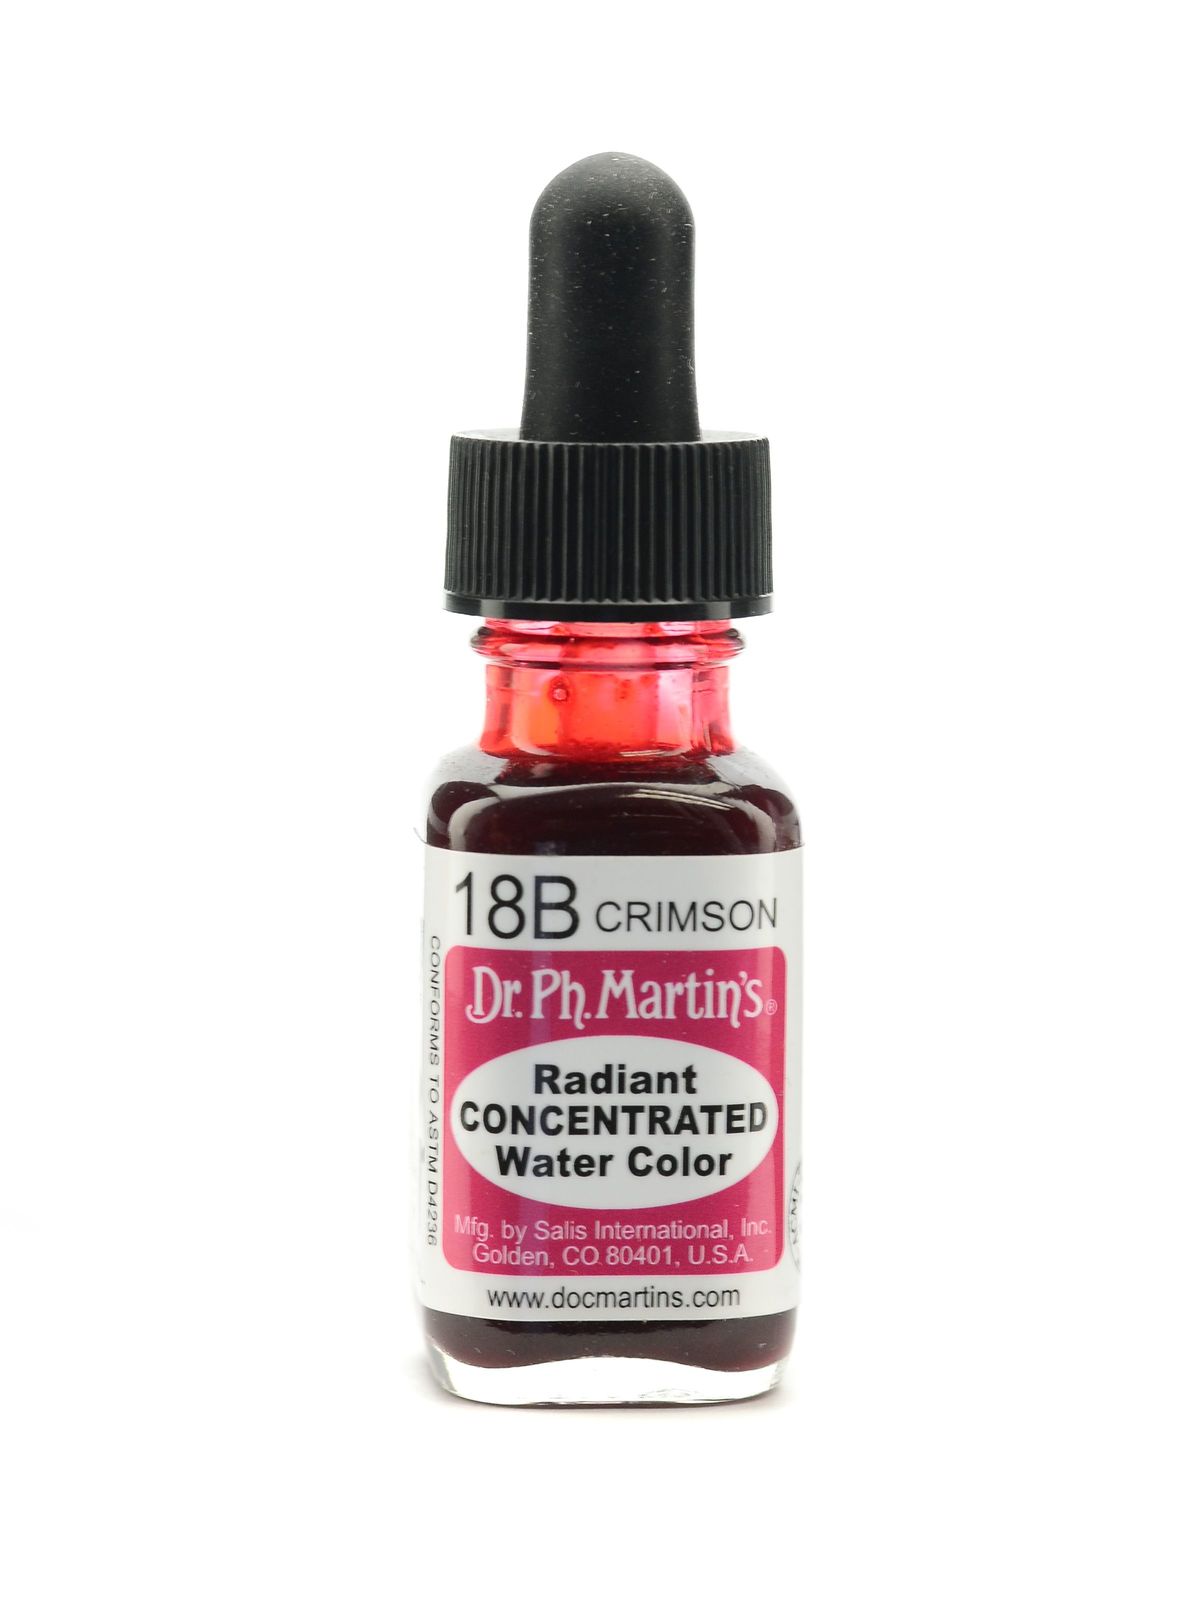 Radiant Concentrated Watercolors Crimson 1 2 Oz.